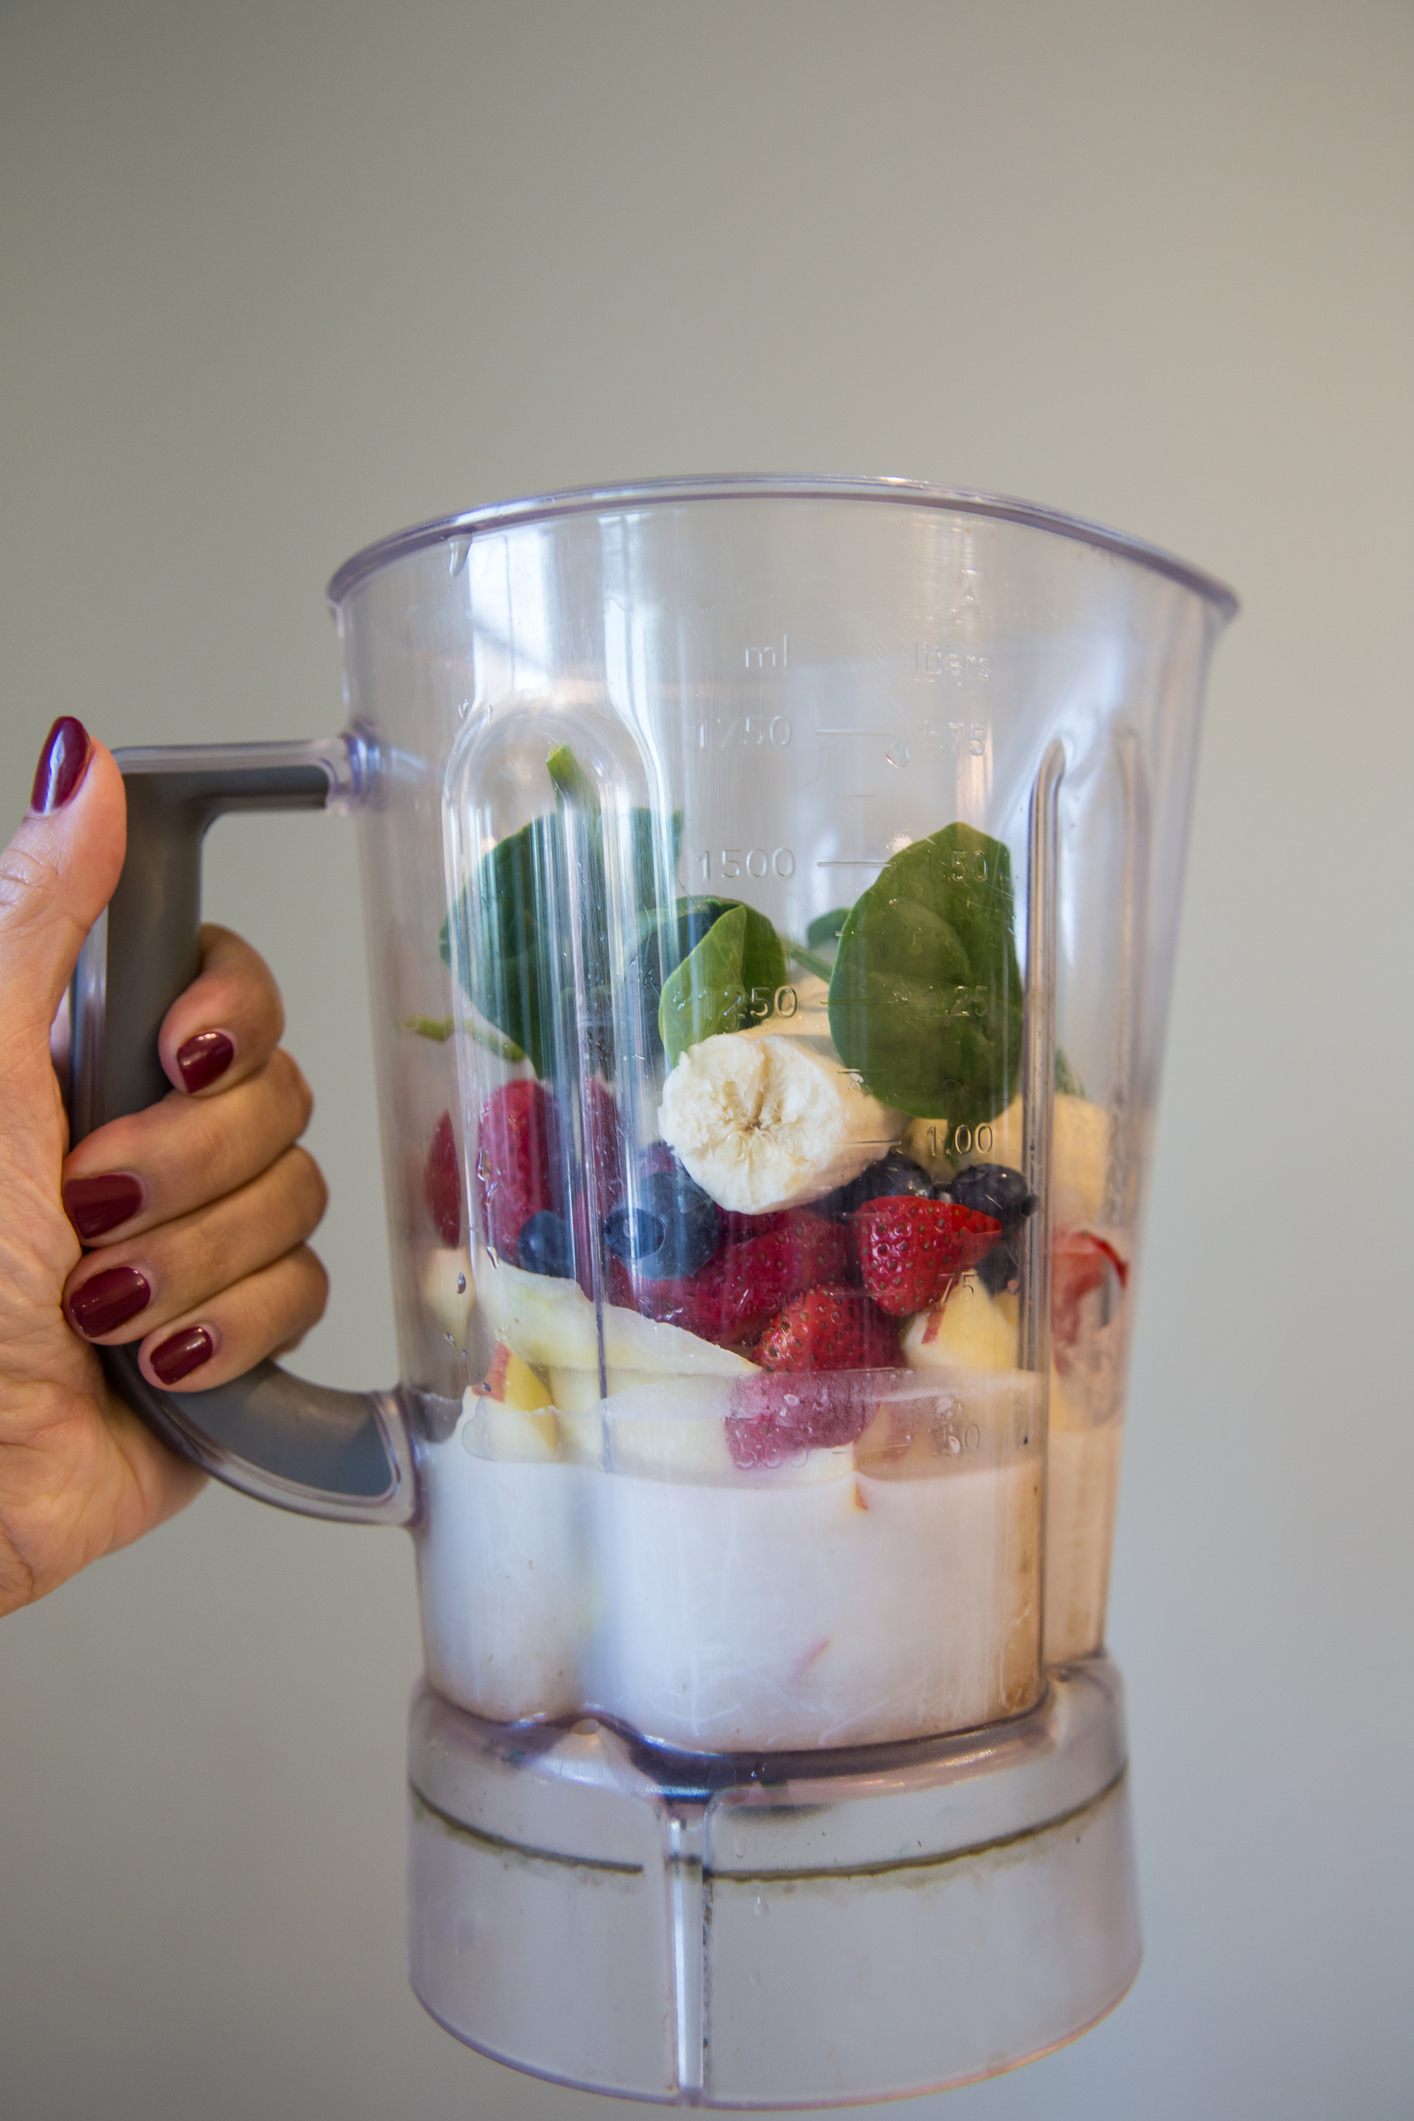 Hand holding a blender filled with assorted fruits and spinach, ready to blend